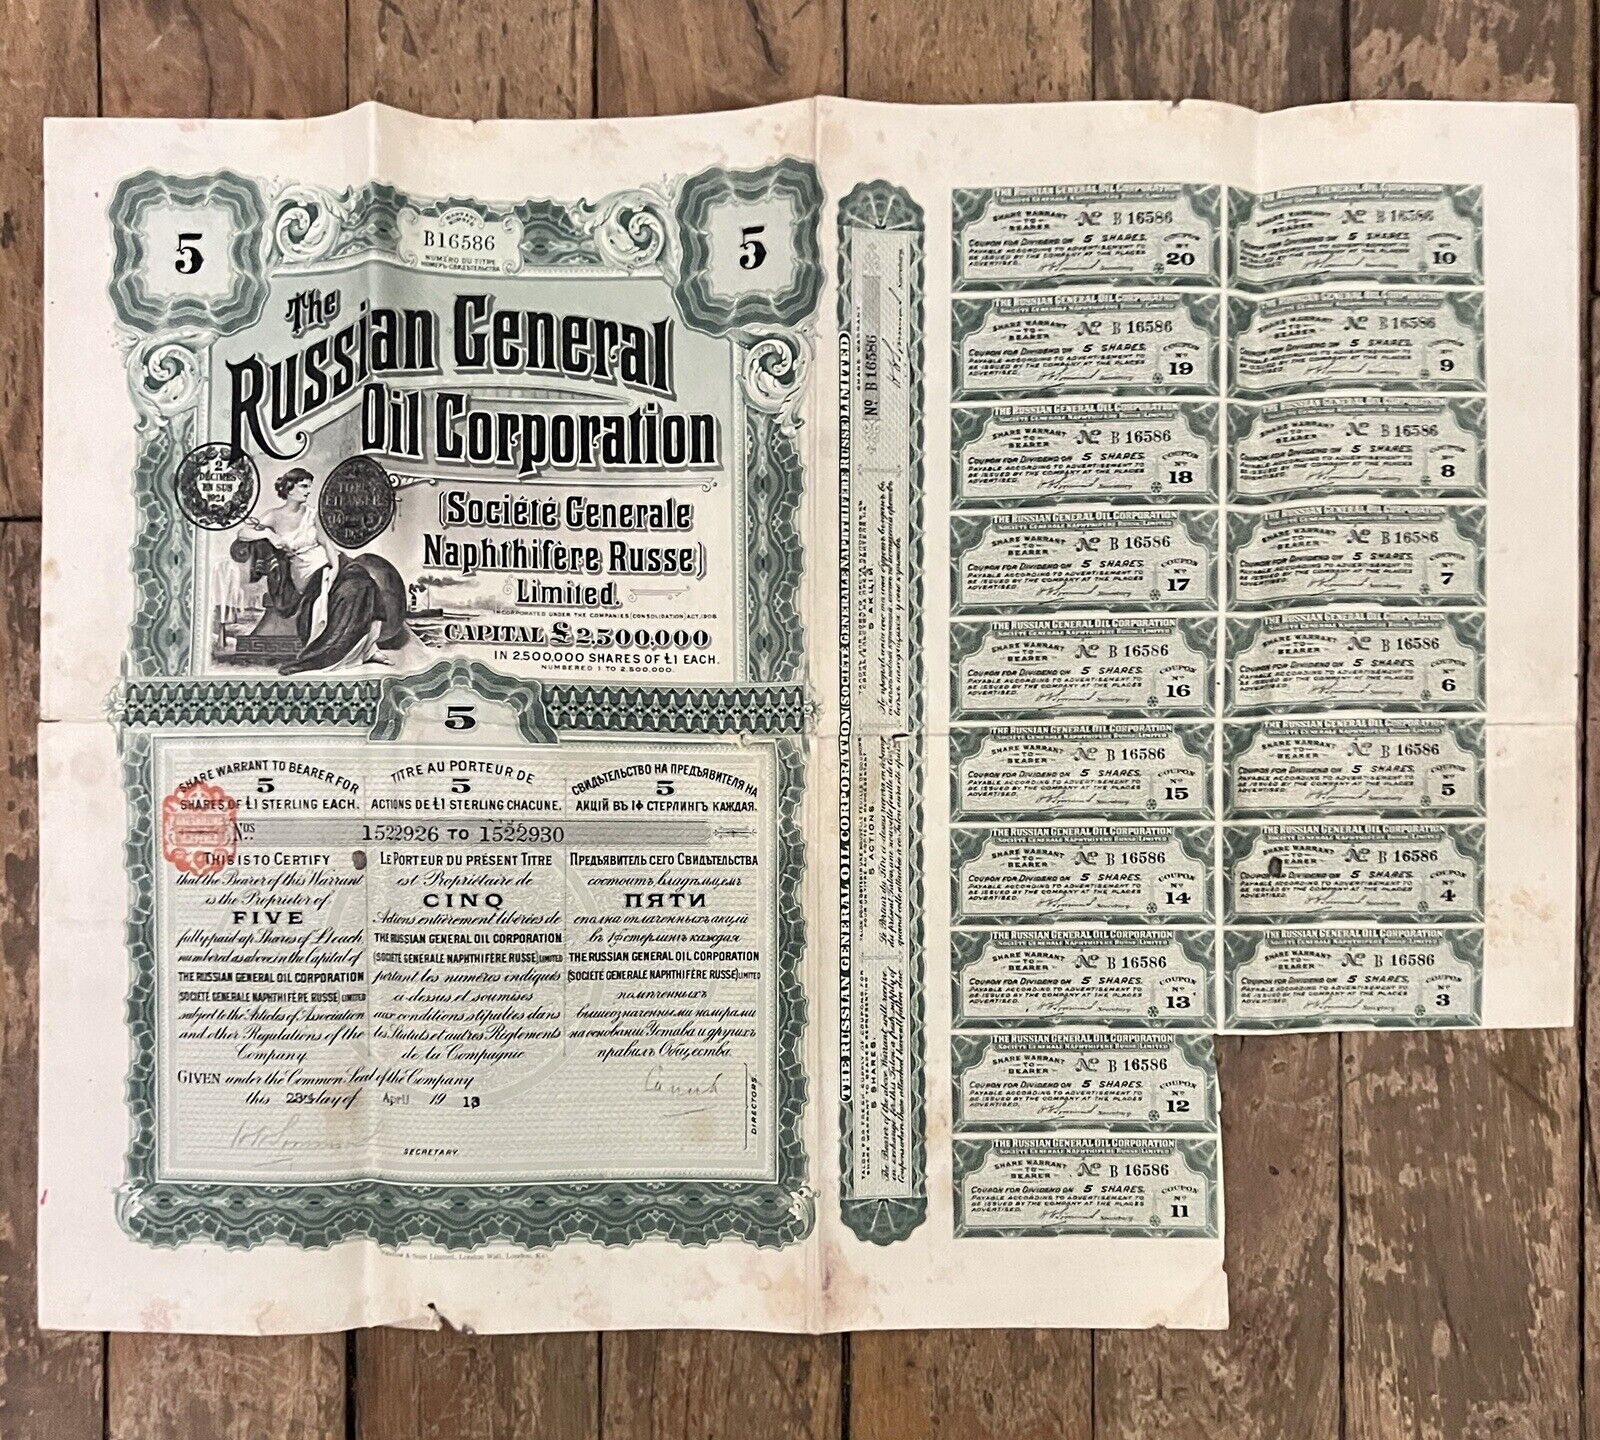 SIGNED ACTION - RUSSIAN GENERAL OIL CORPORATION - 5 POUNDS - 1913